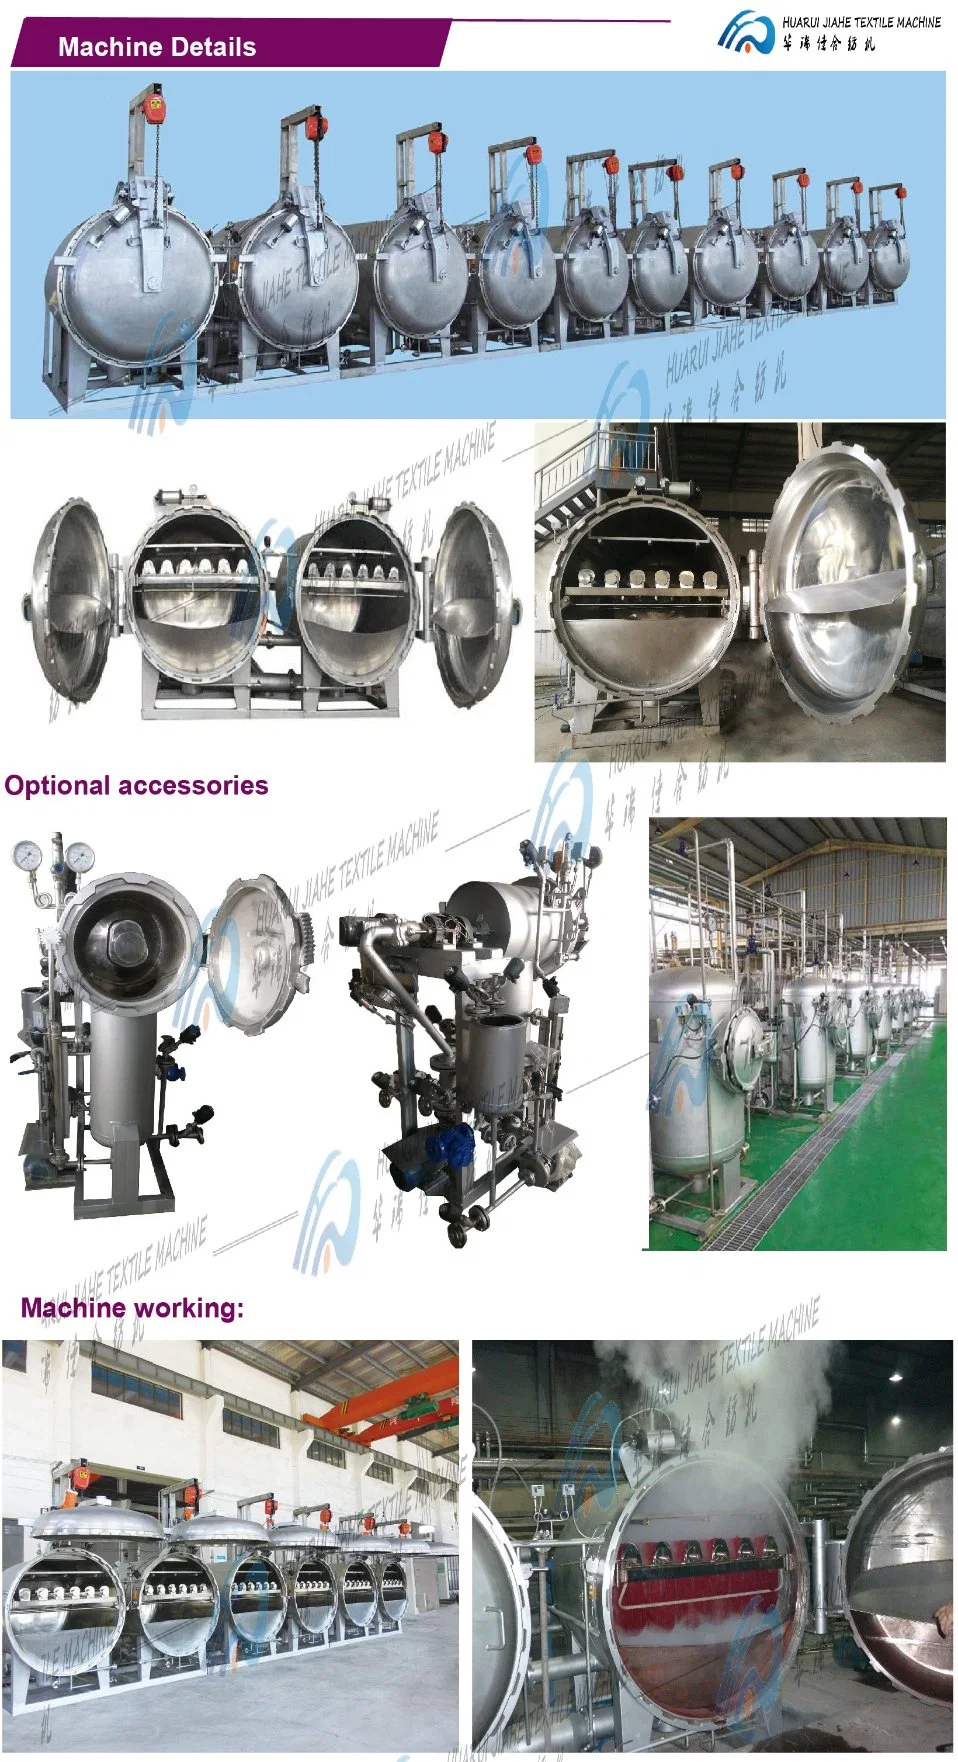 New Brand 2020 Steaming Dyeing Machine Manufacturer with Cheapest Price Textile Machinery High Temperature and Pressure Yarn Single Nozzle Jet Dyeing Machine